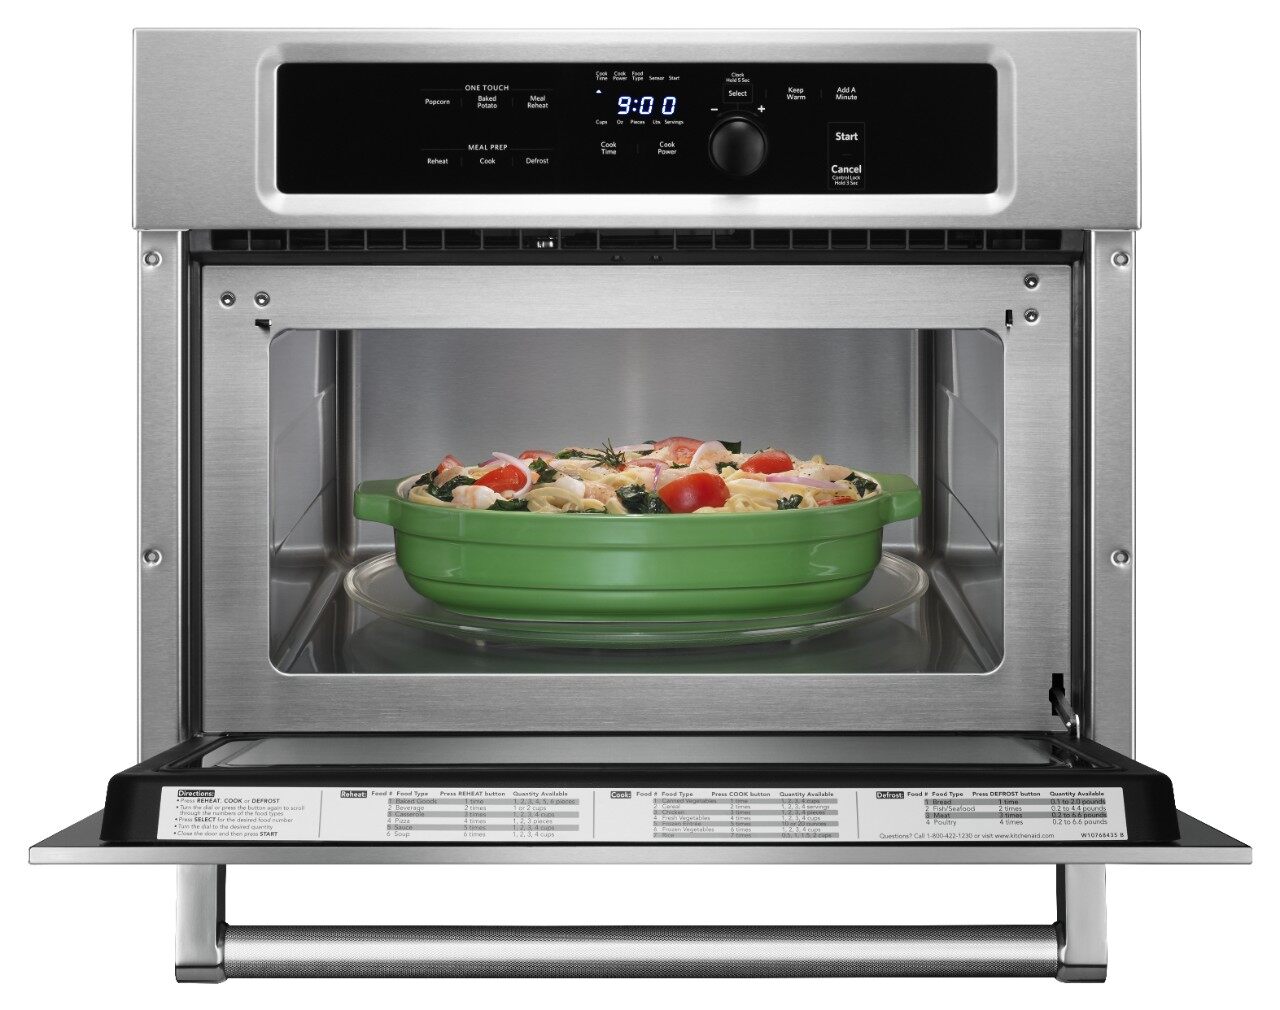 KitchenAid 24-inch, 1.2 cu. ft. Under-Counter Microwave Oven Drawer KM